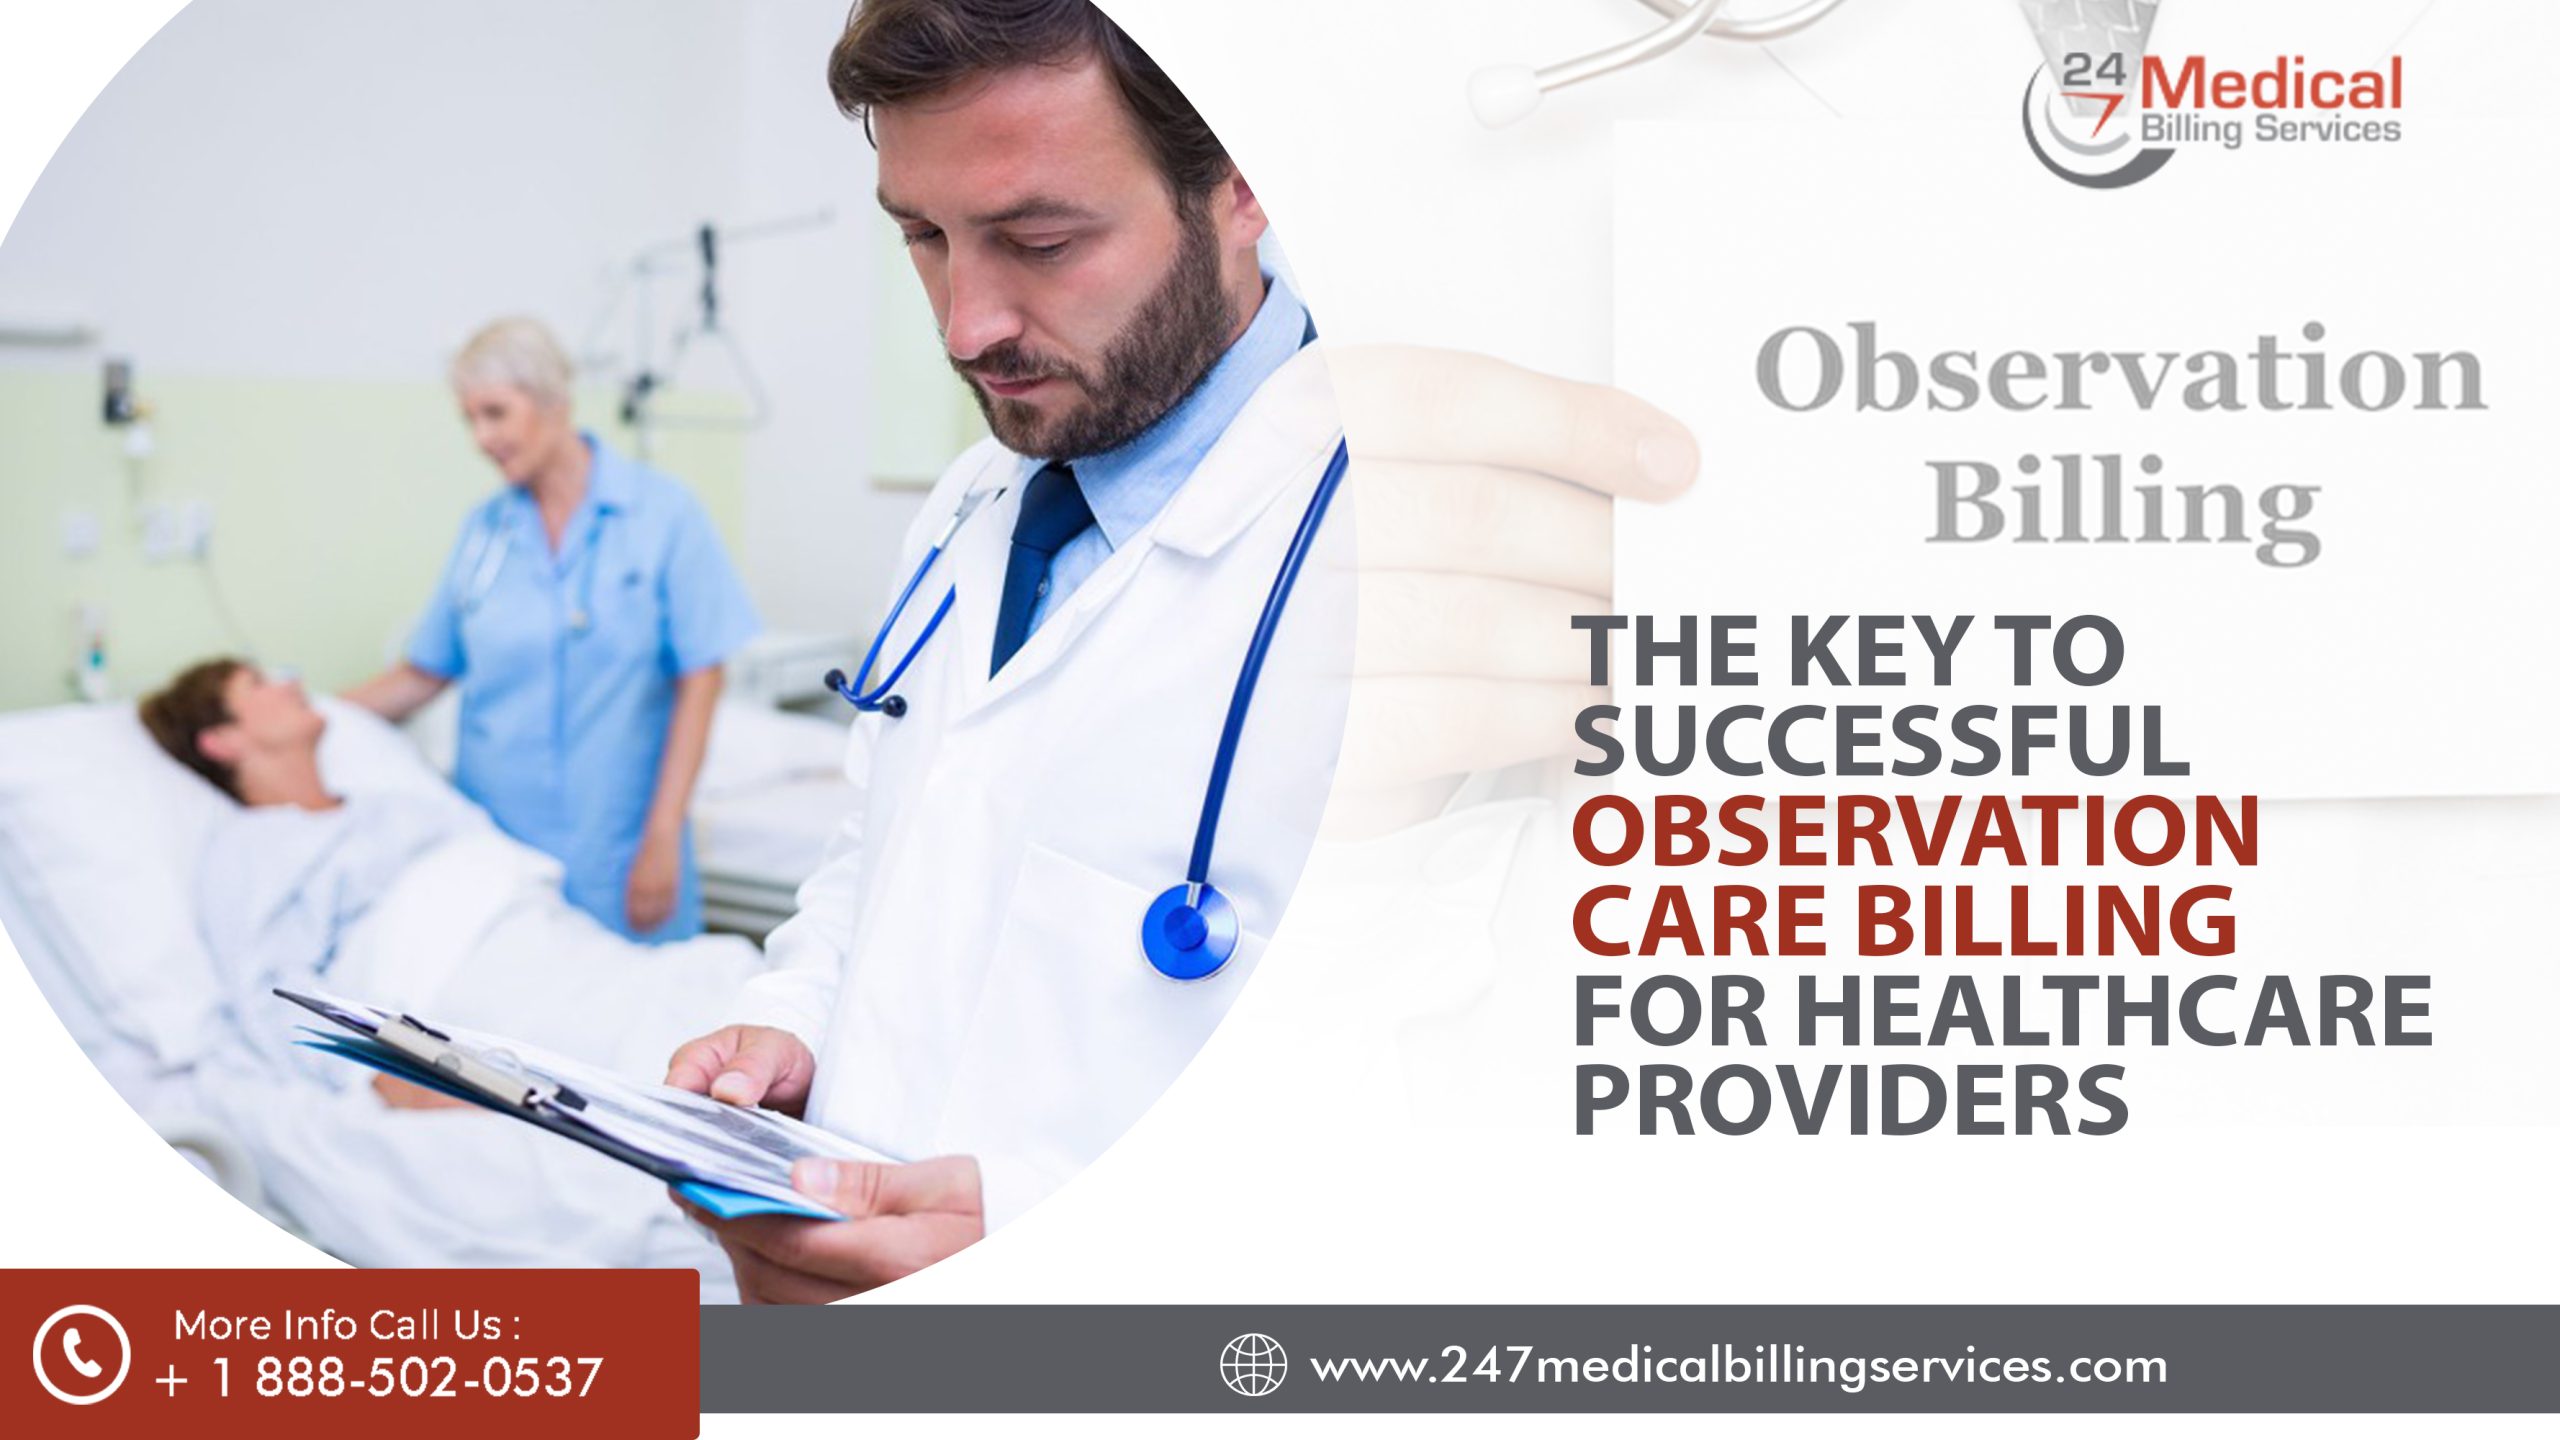  The Key to Successful Observation Care Billing for Healthcare Providers